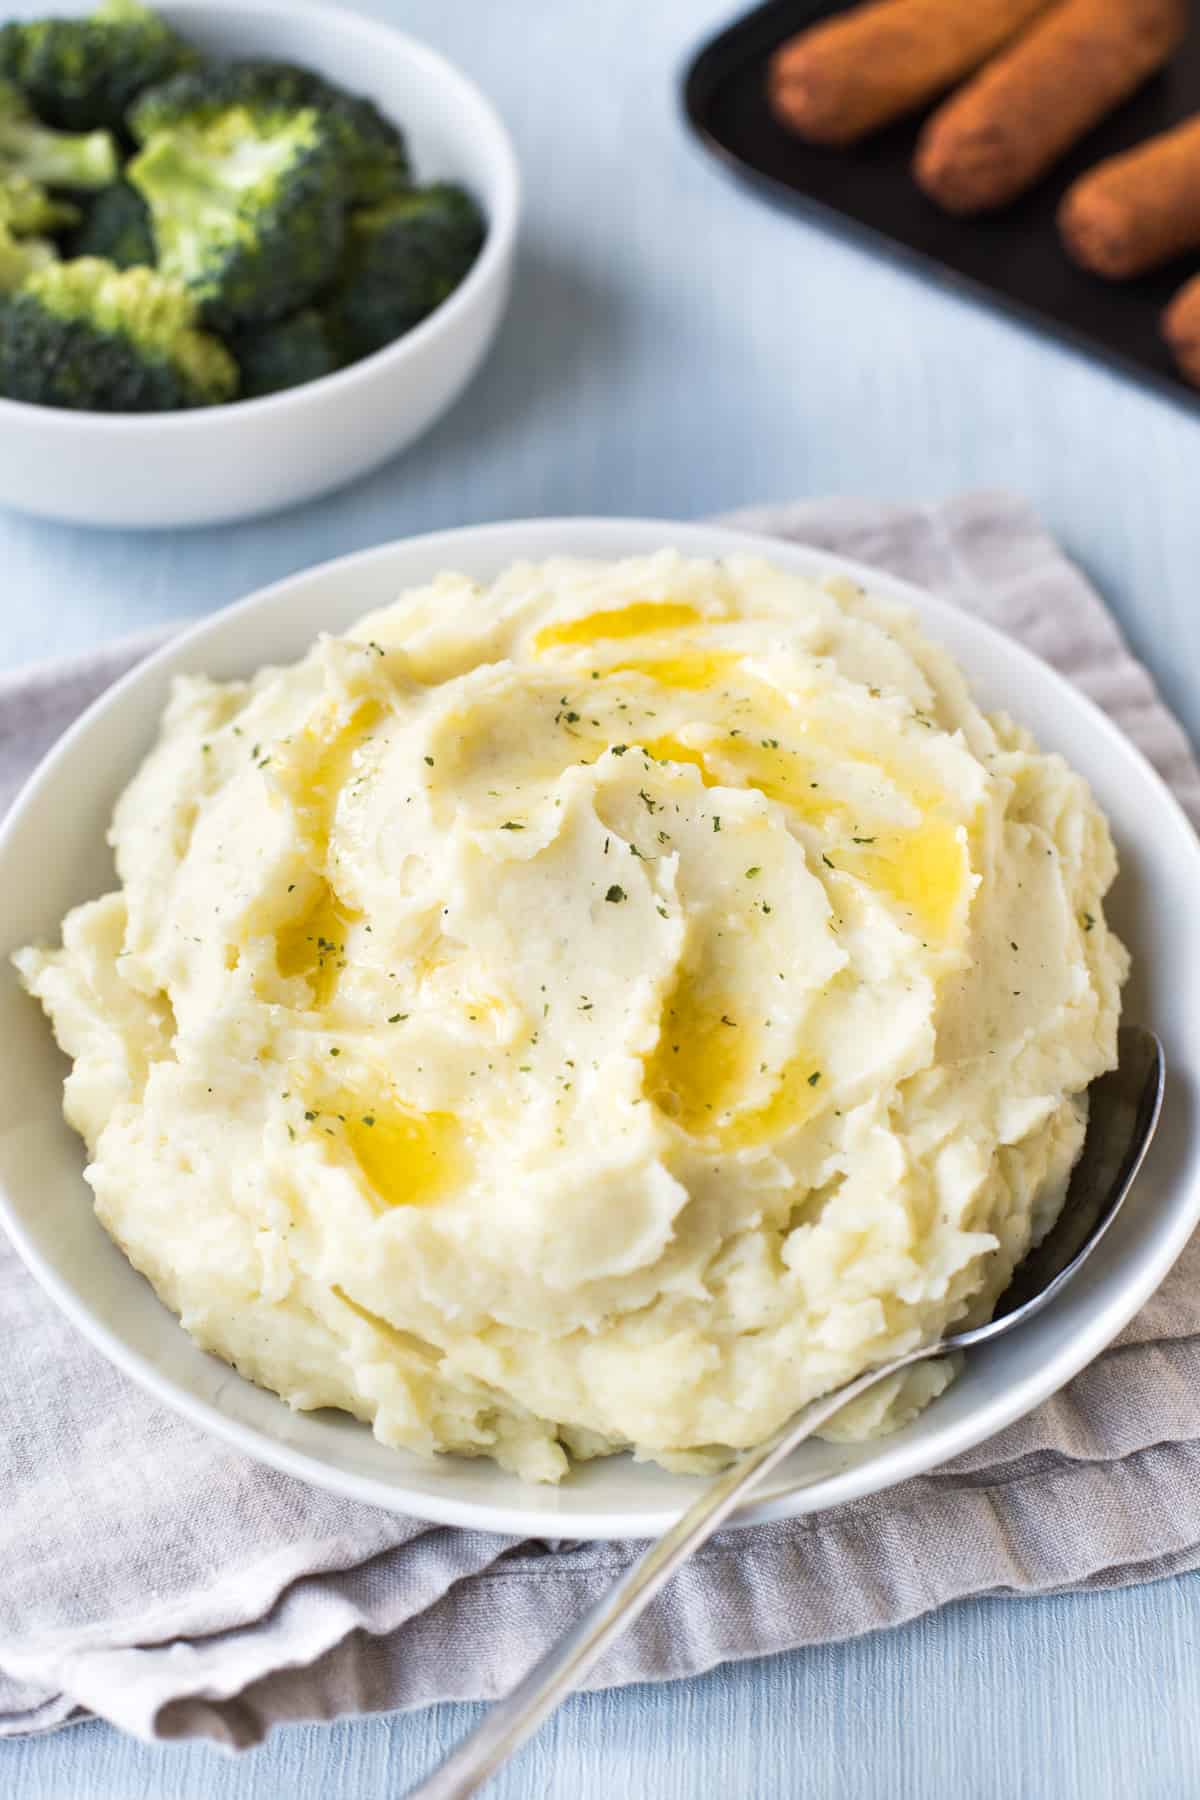 Master The Art Of Making Creamy Mashed Potatoes: A Beginner's Guide